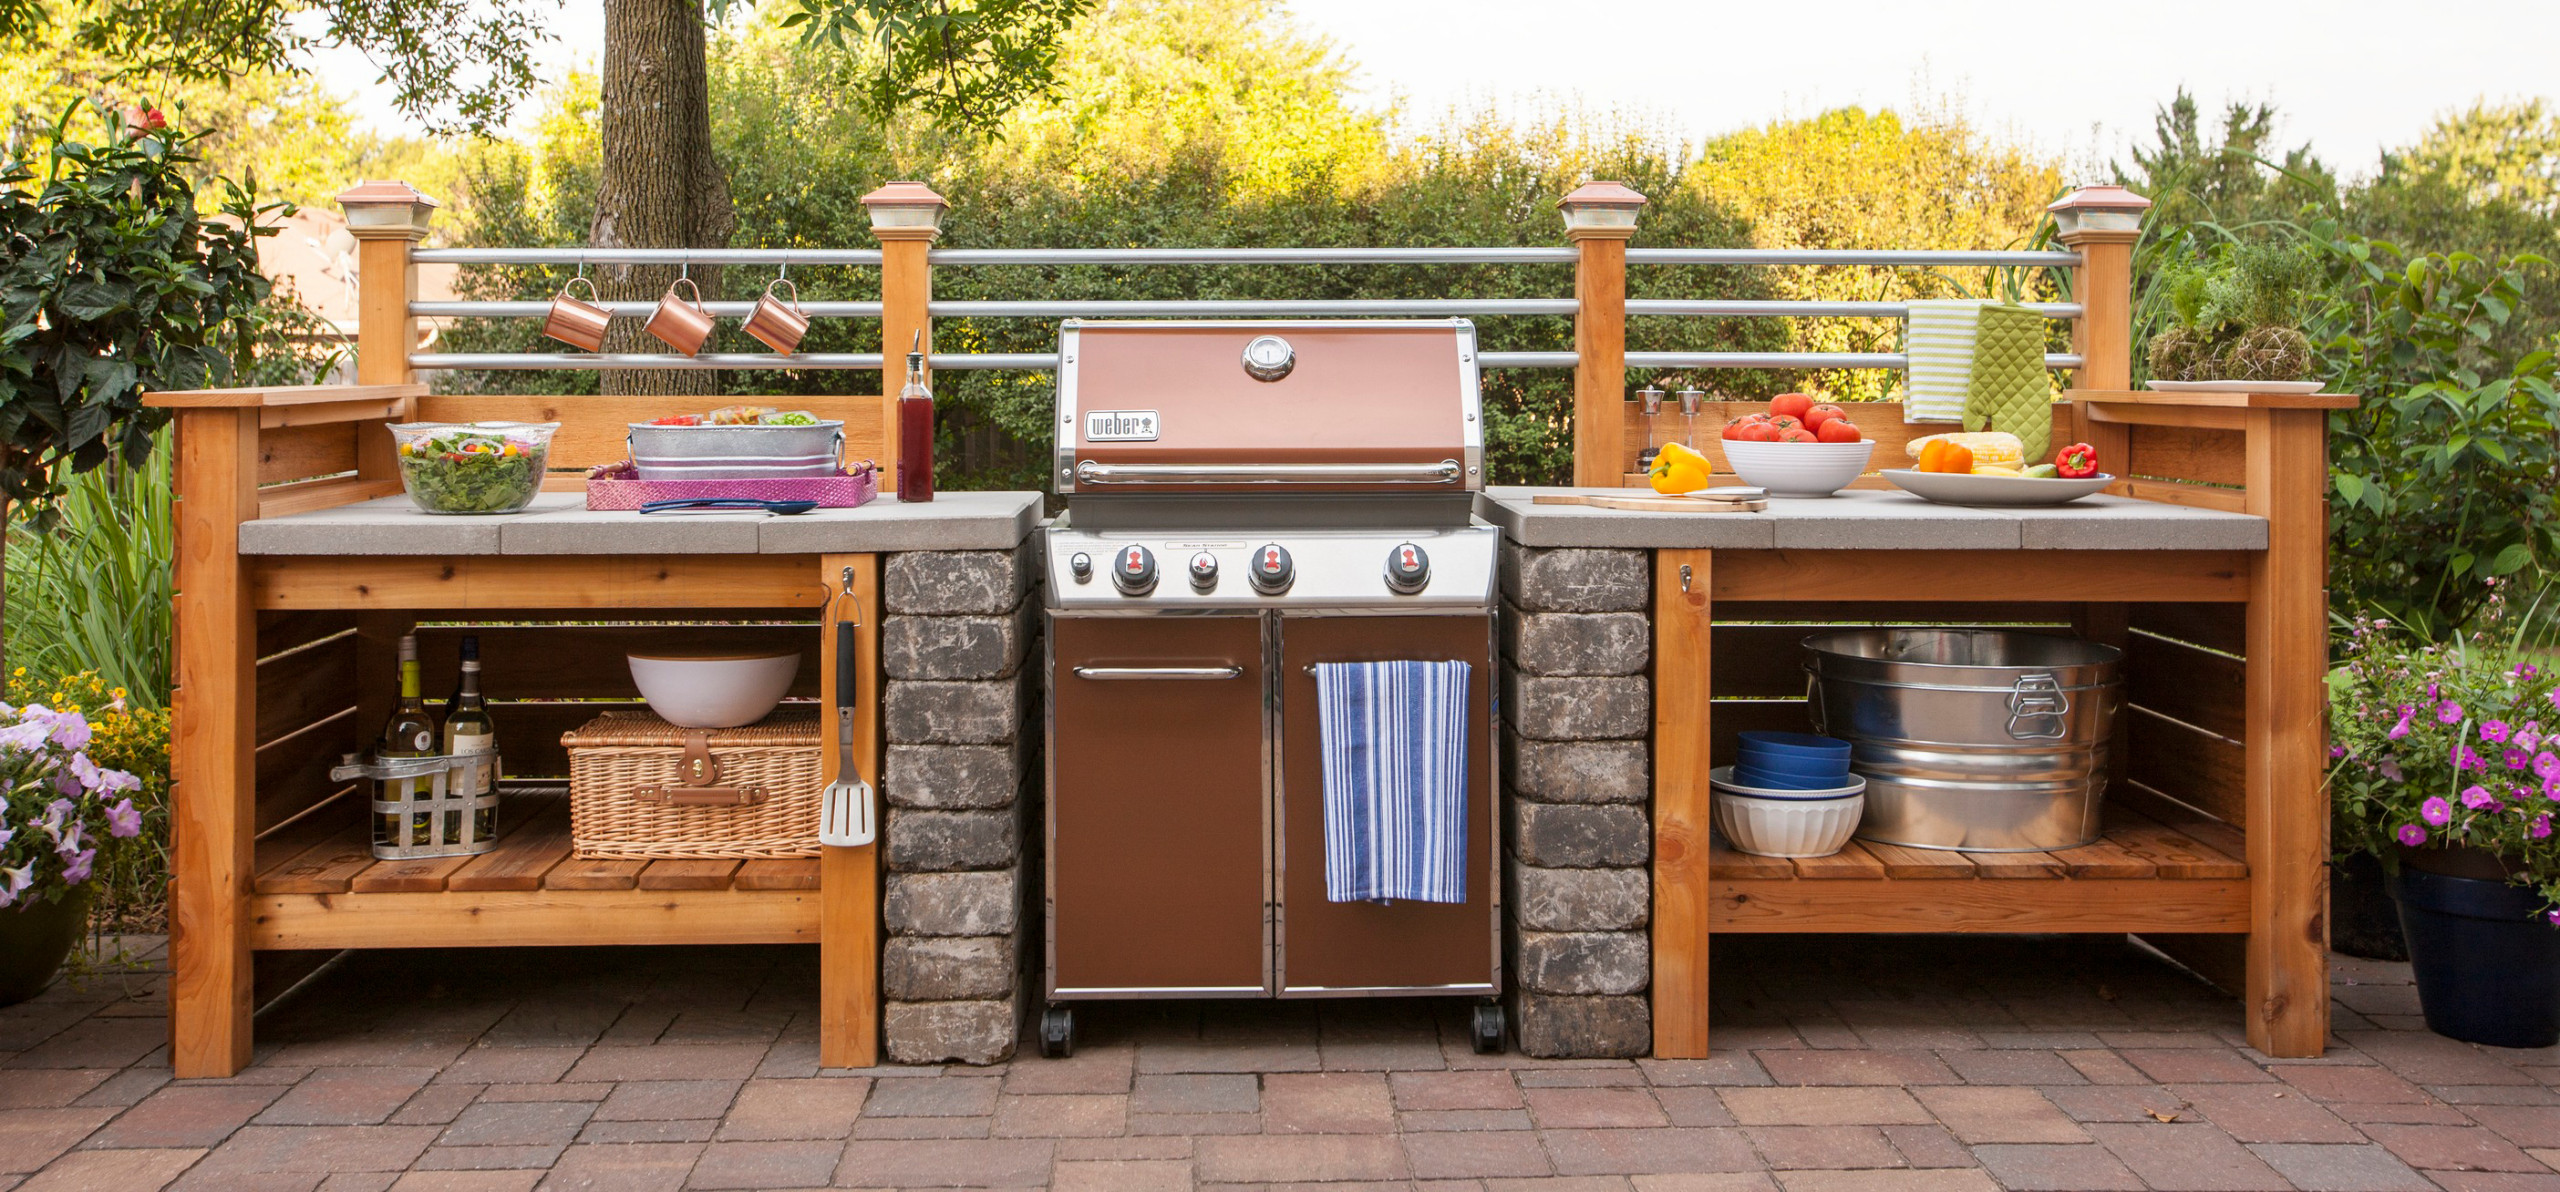 20 Small Outdoor Kitchen Ideas You'll Love   August, 20   Houzz